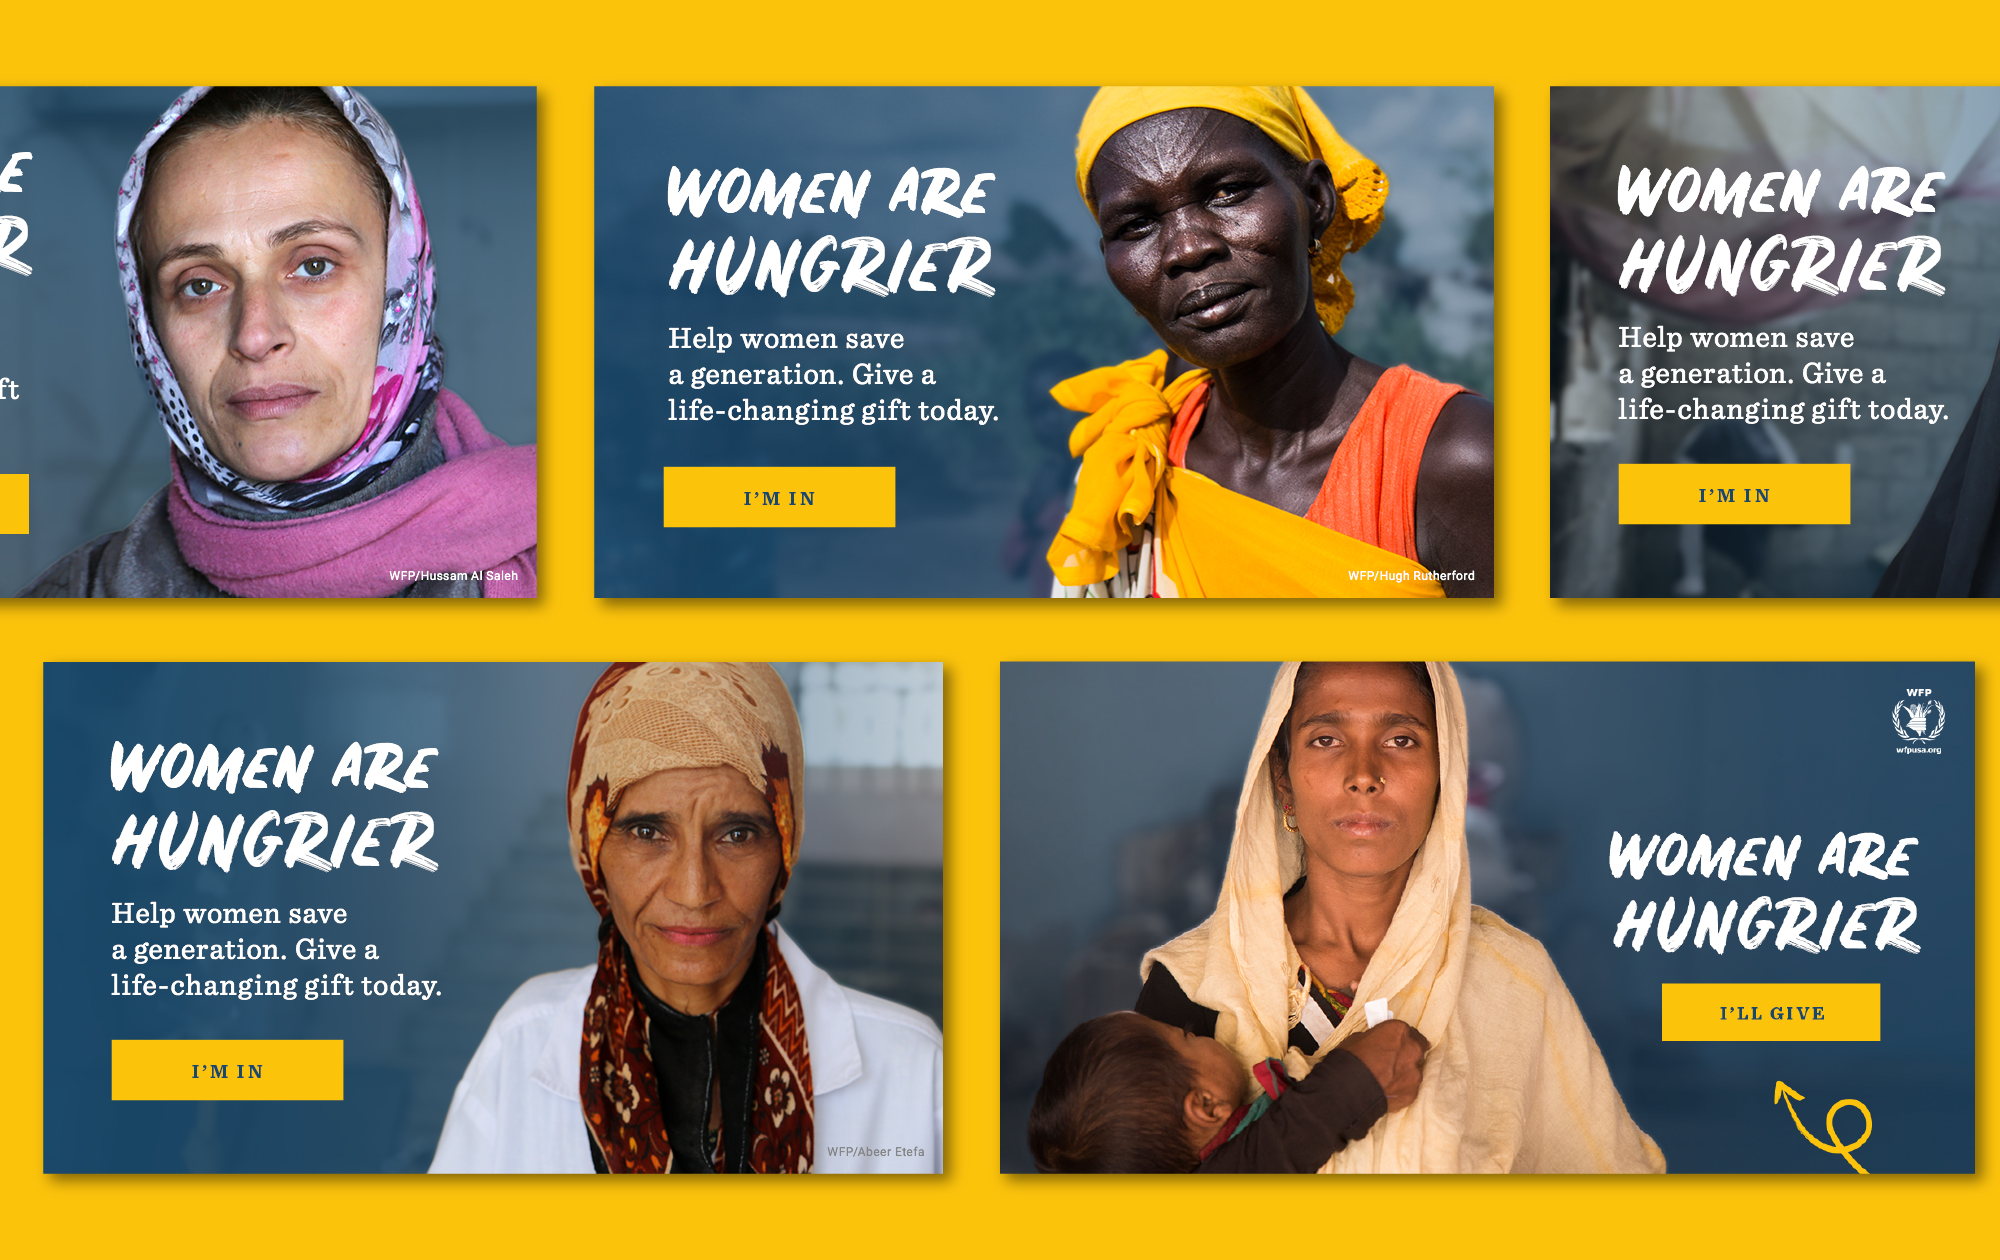 Collection of social graphics featuring four different women from the "Women Are Hungrier" campaign. 